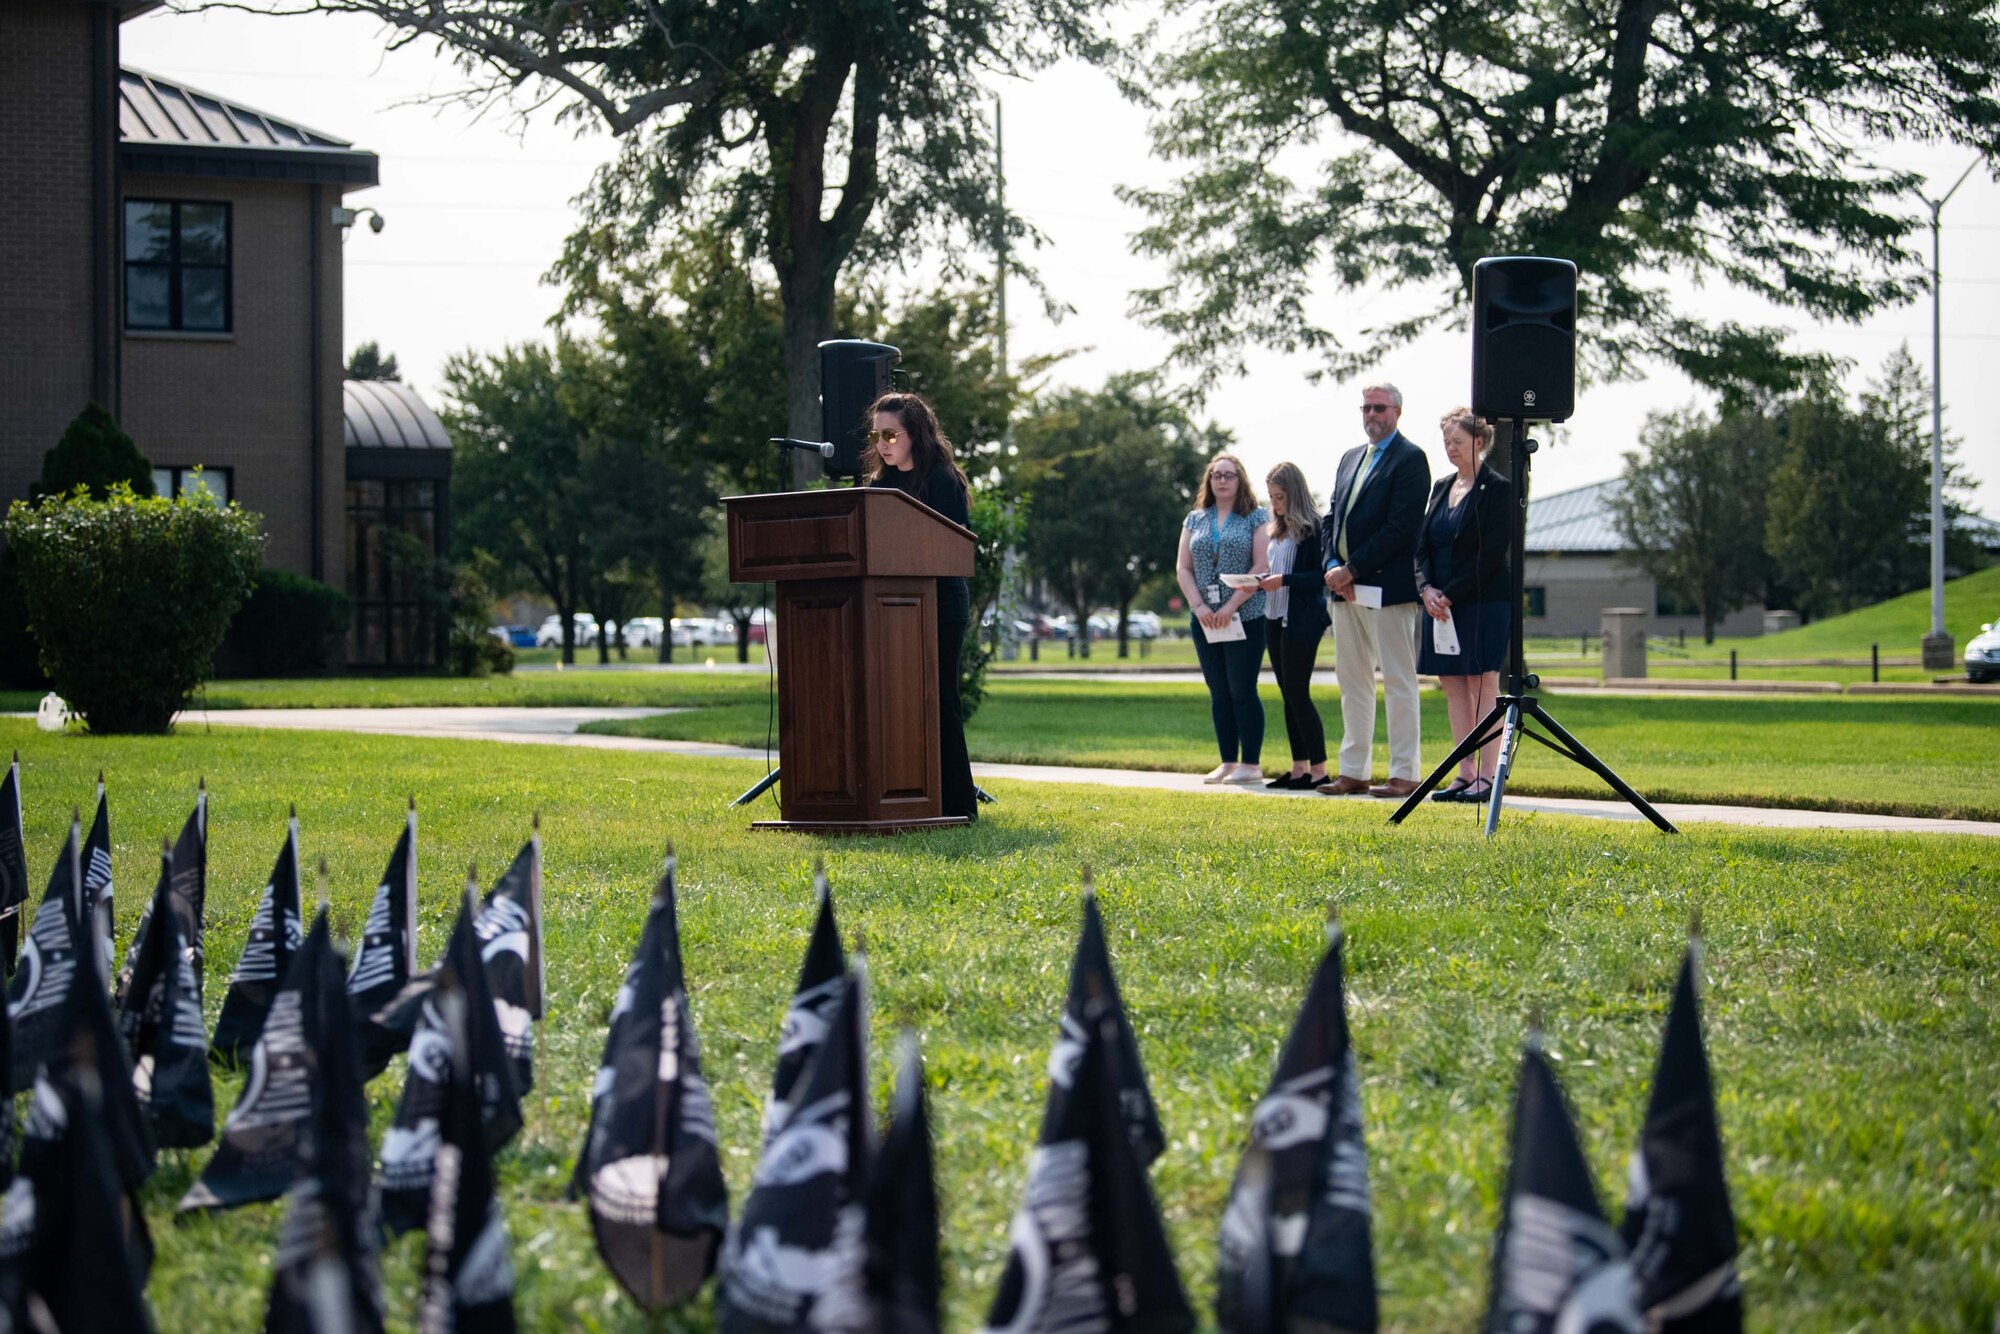 Hallie Stinebuck, Armed Forces Medical Examiner System supervisor DNA analyst, reads a list of repatriated service members during a retreat ceremony commemorating National POW/MIA Recognition Day at Dover Air Force Base, Delaware, Sept. 16, 2022. Members of the AFMES past accounting and DNA registry operations read names of service members who were repatriated this year. (U.S. Air Force photo by Senior Airman Faith Barron)